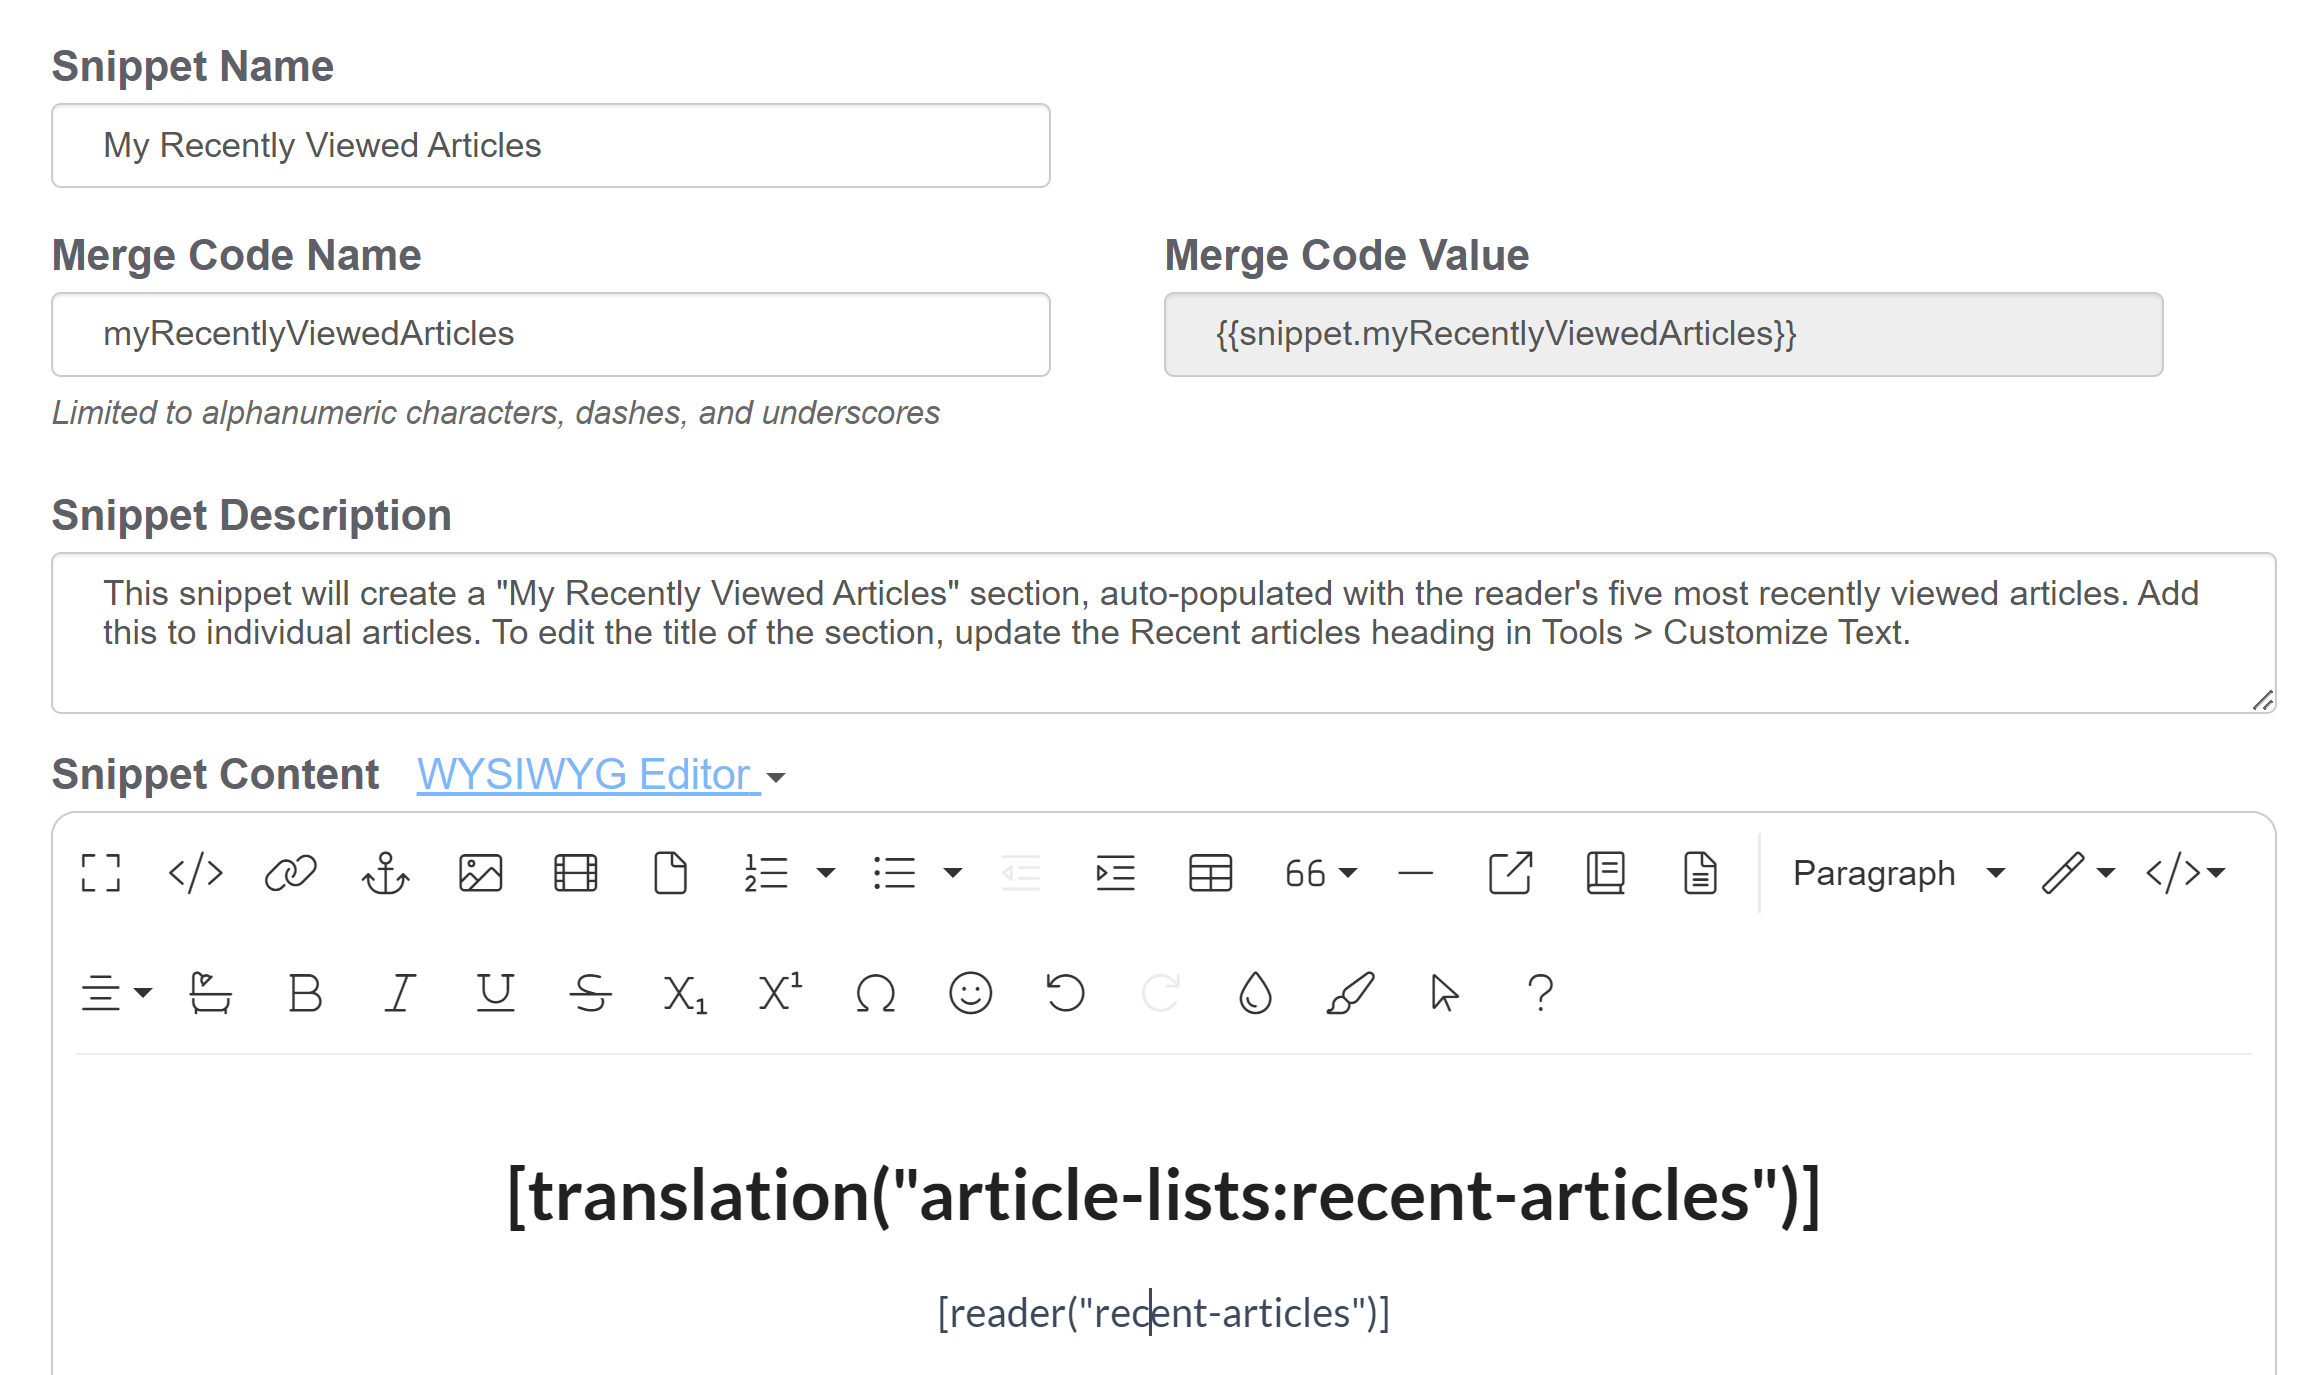 A sample Recent Articles snippet. The editor includes a centered heading level 2 that contains the merge code for the recent articles list header and a centered paragraph beneath it containing the recent-articles reader merge code.